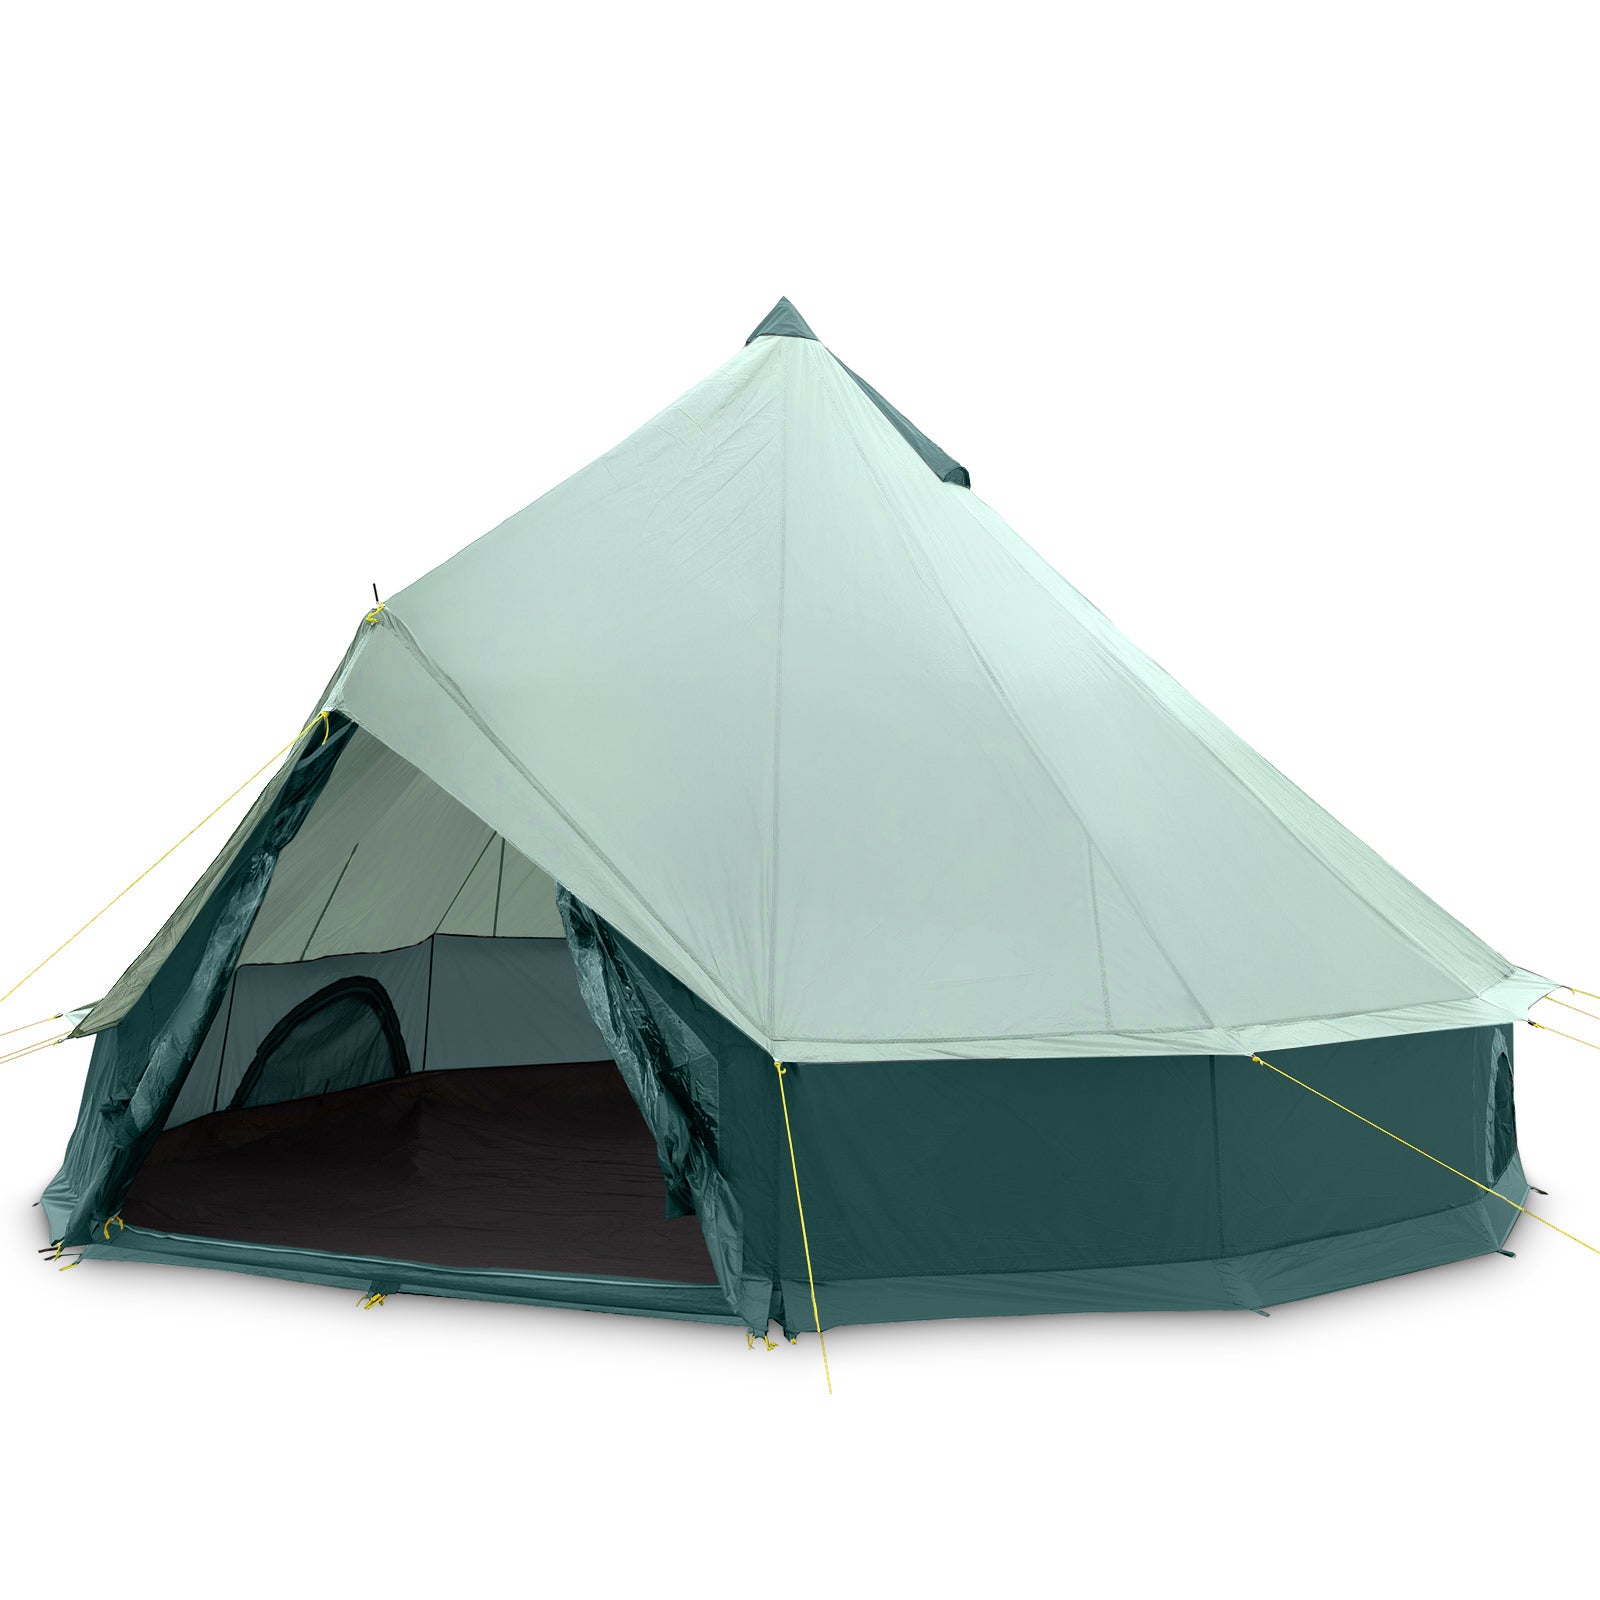 qeedo Bell, comfort group tent in tipi style